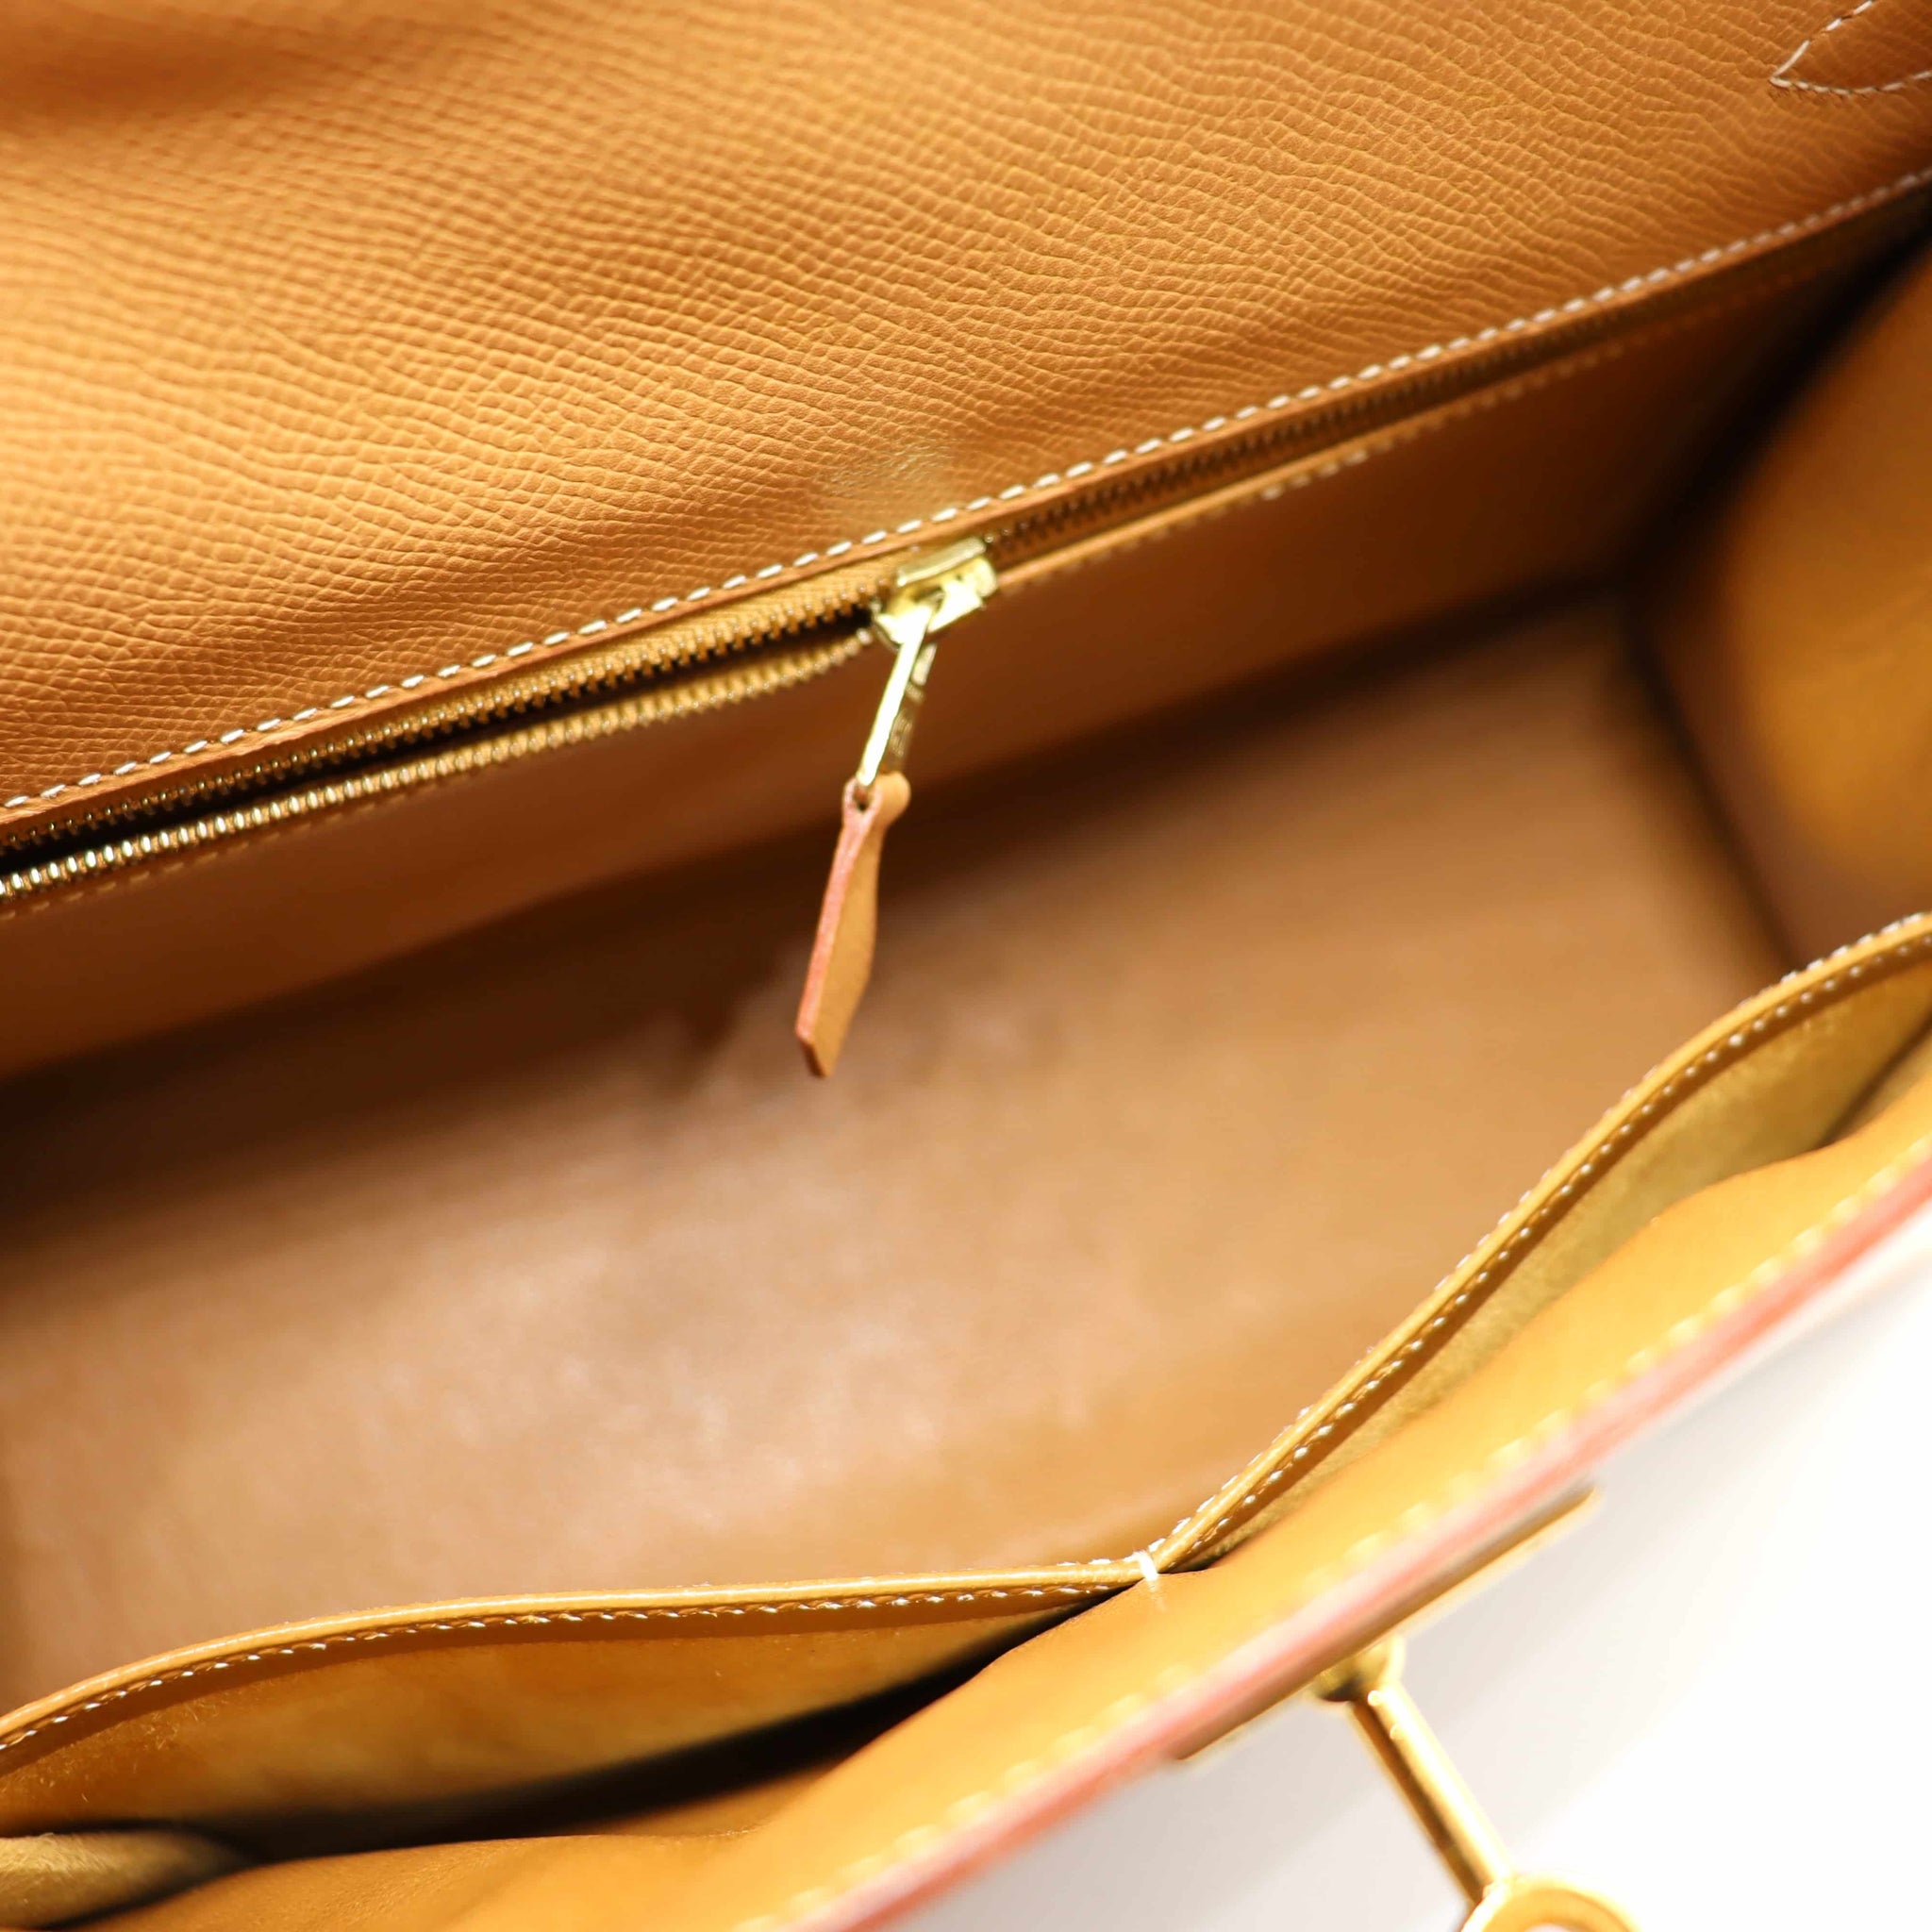 Affordable kelly 28 gold For Sale, Bags & Wallets